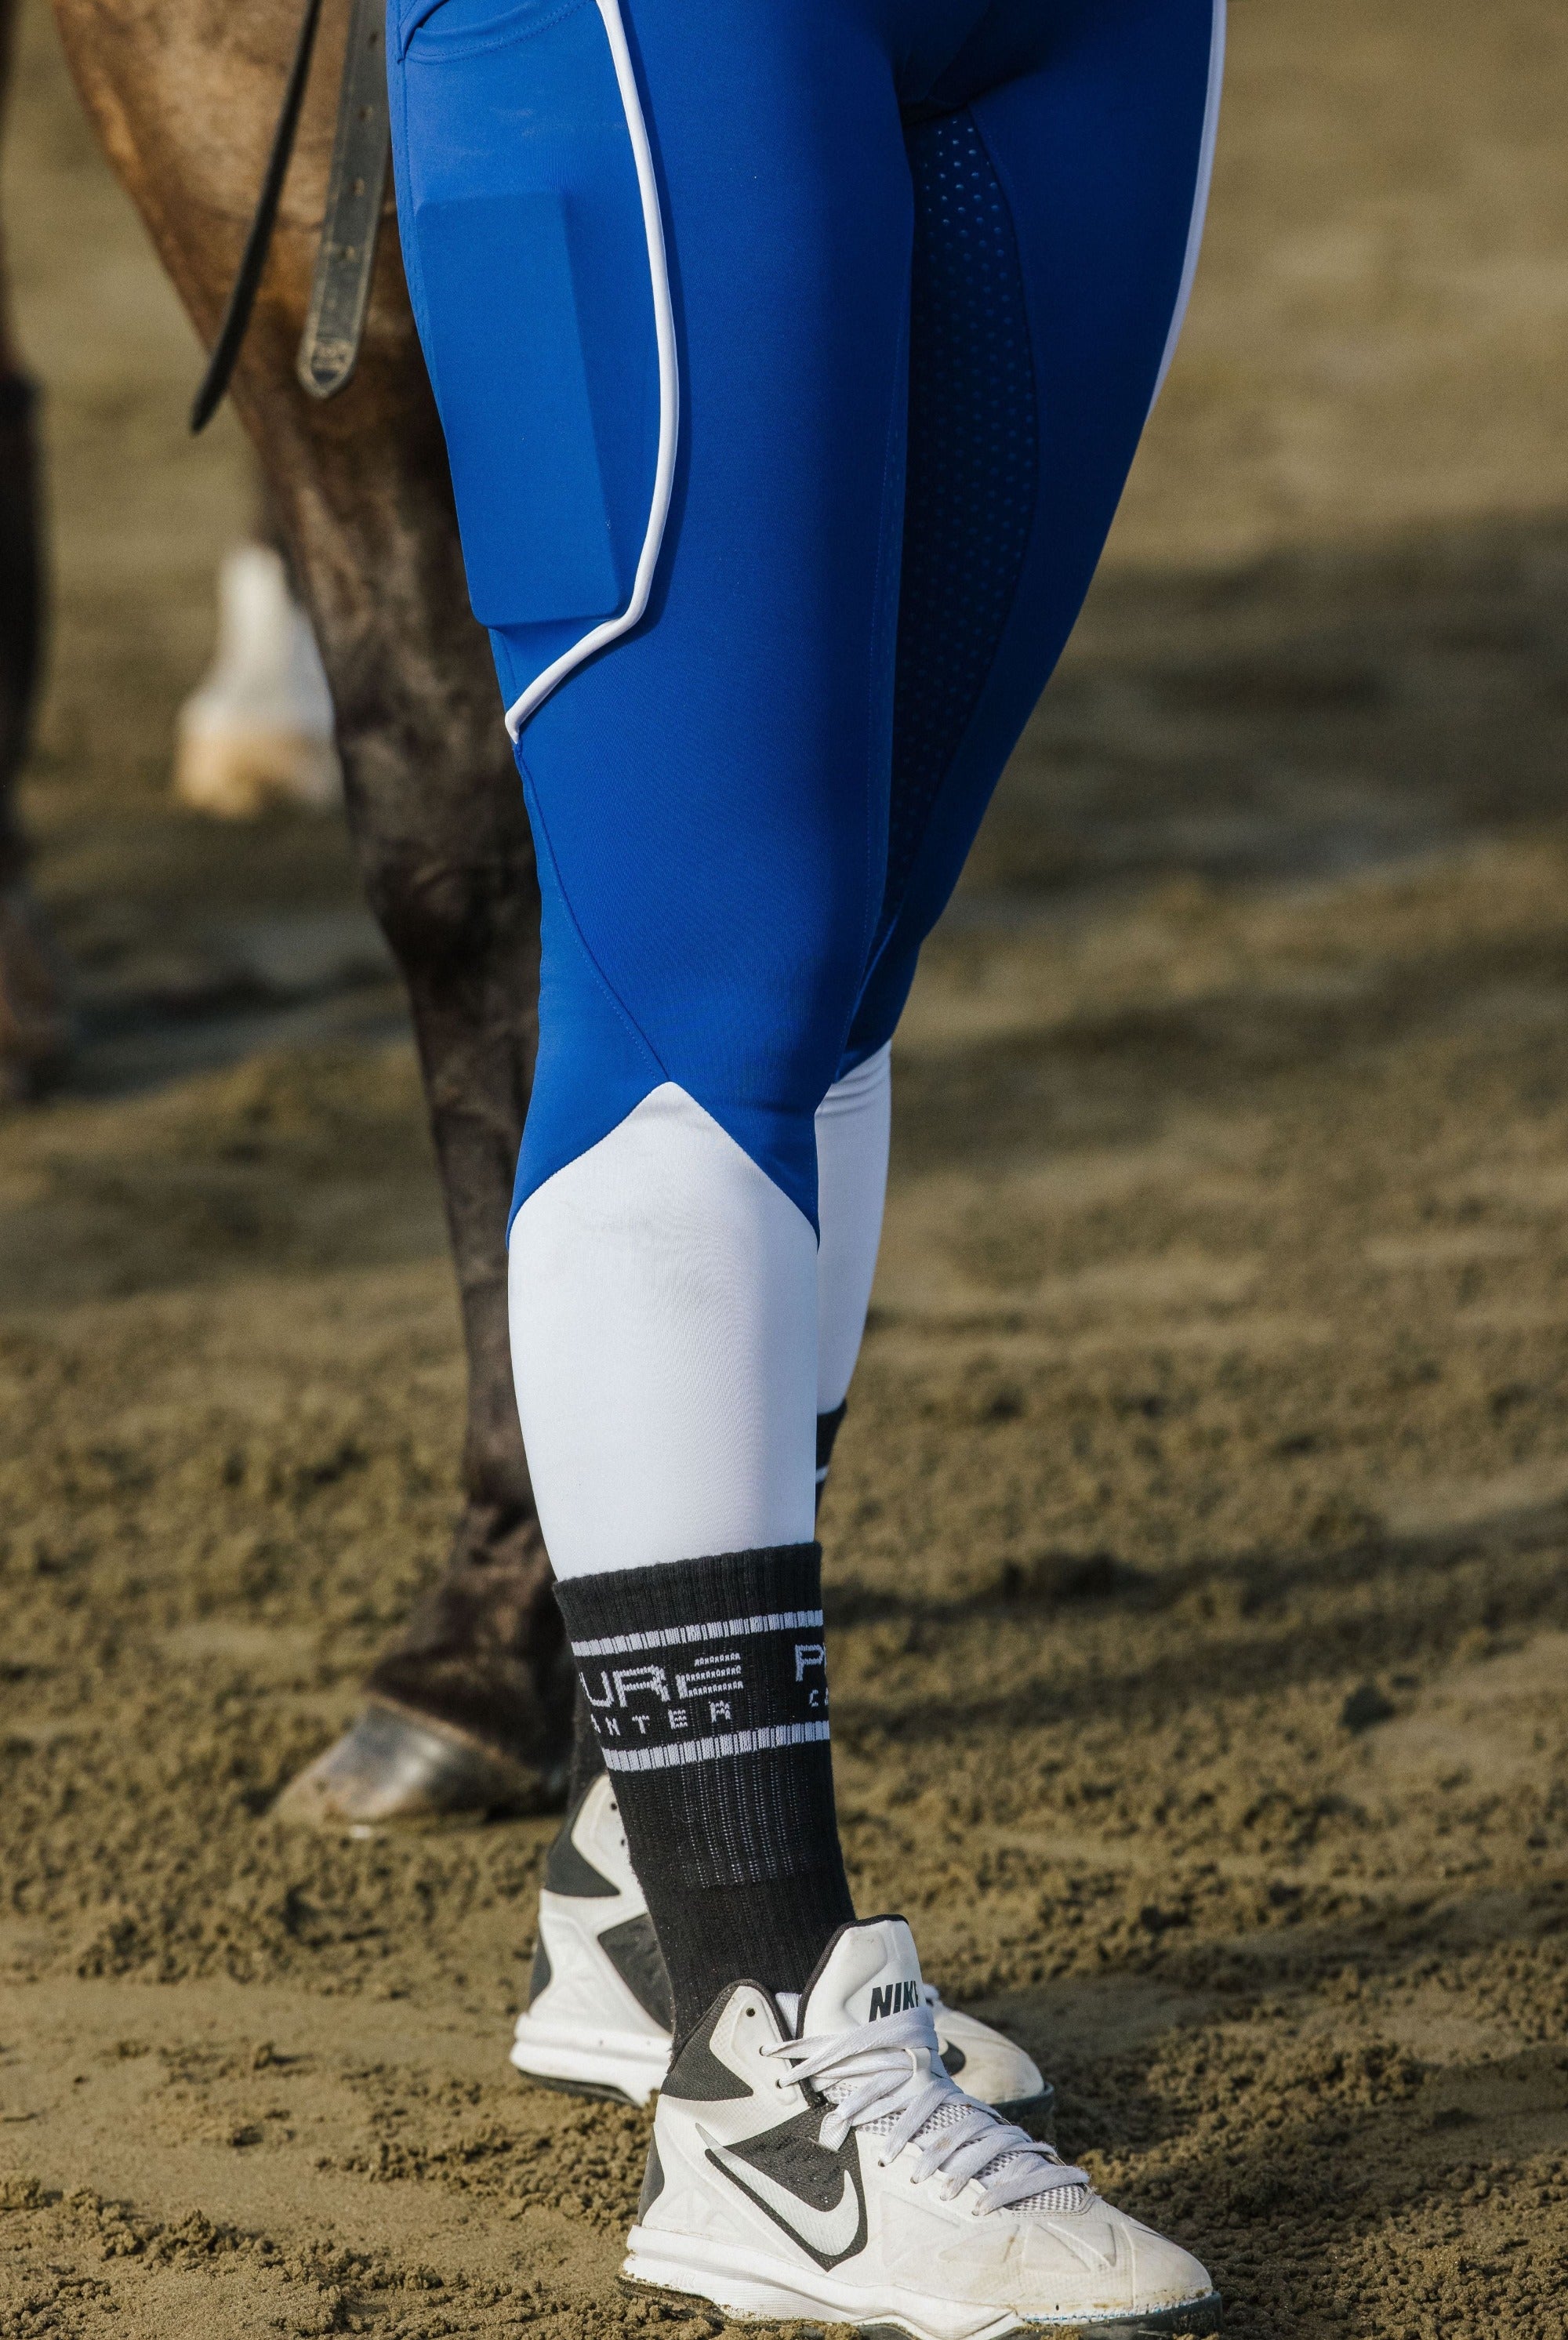 leg shot of royal blue riding tights showing white trim detail on tights as well as bottom white colour offset